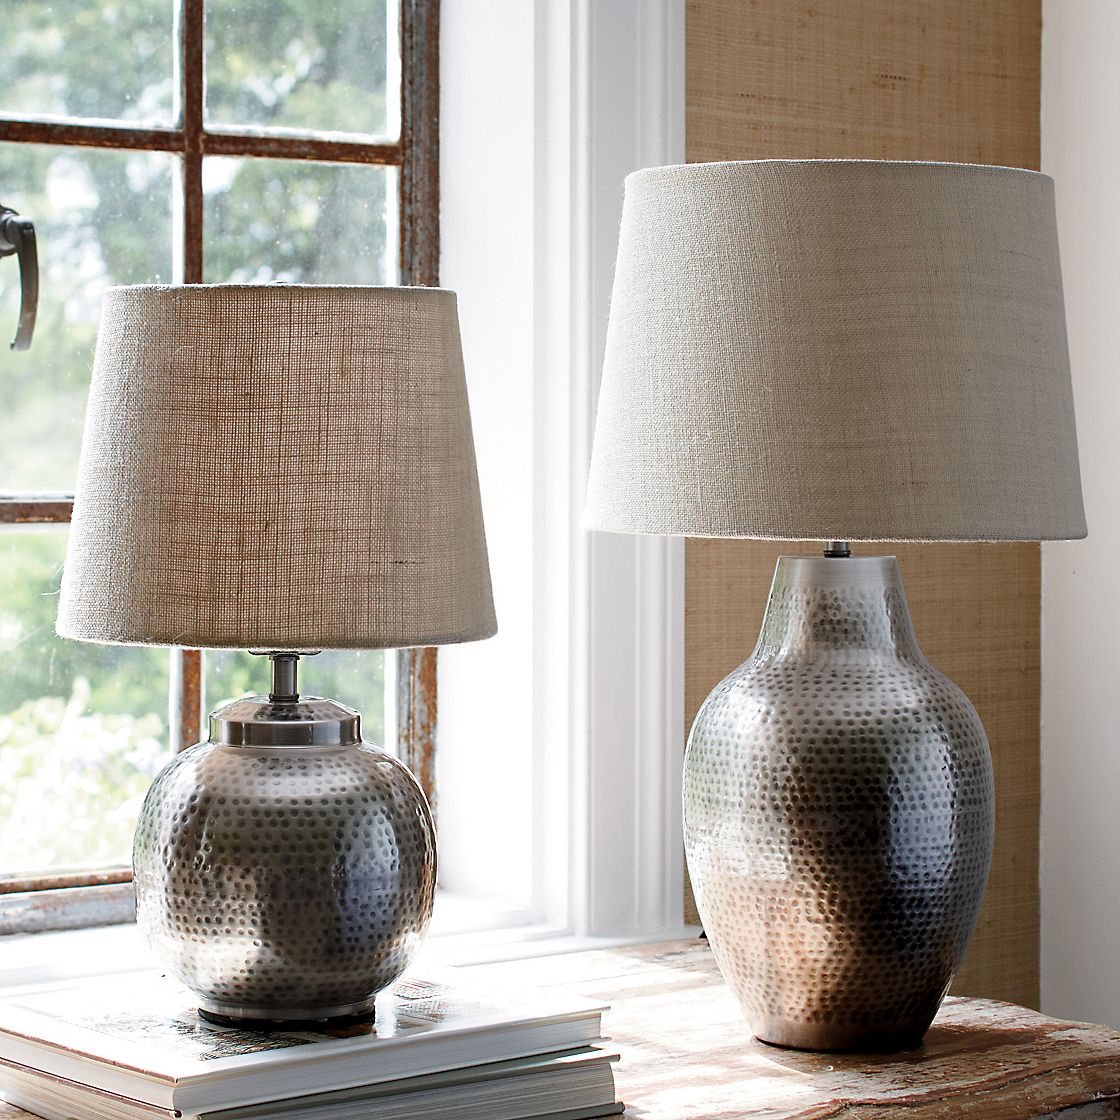 10 adventiges of Small accent table lamps - Warisan Lighting